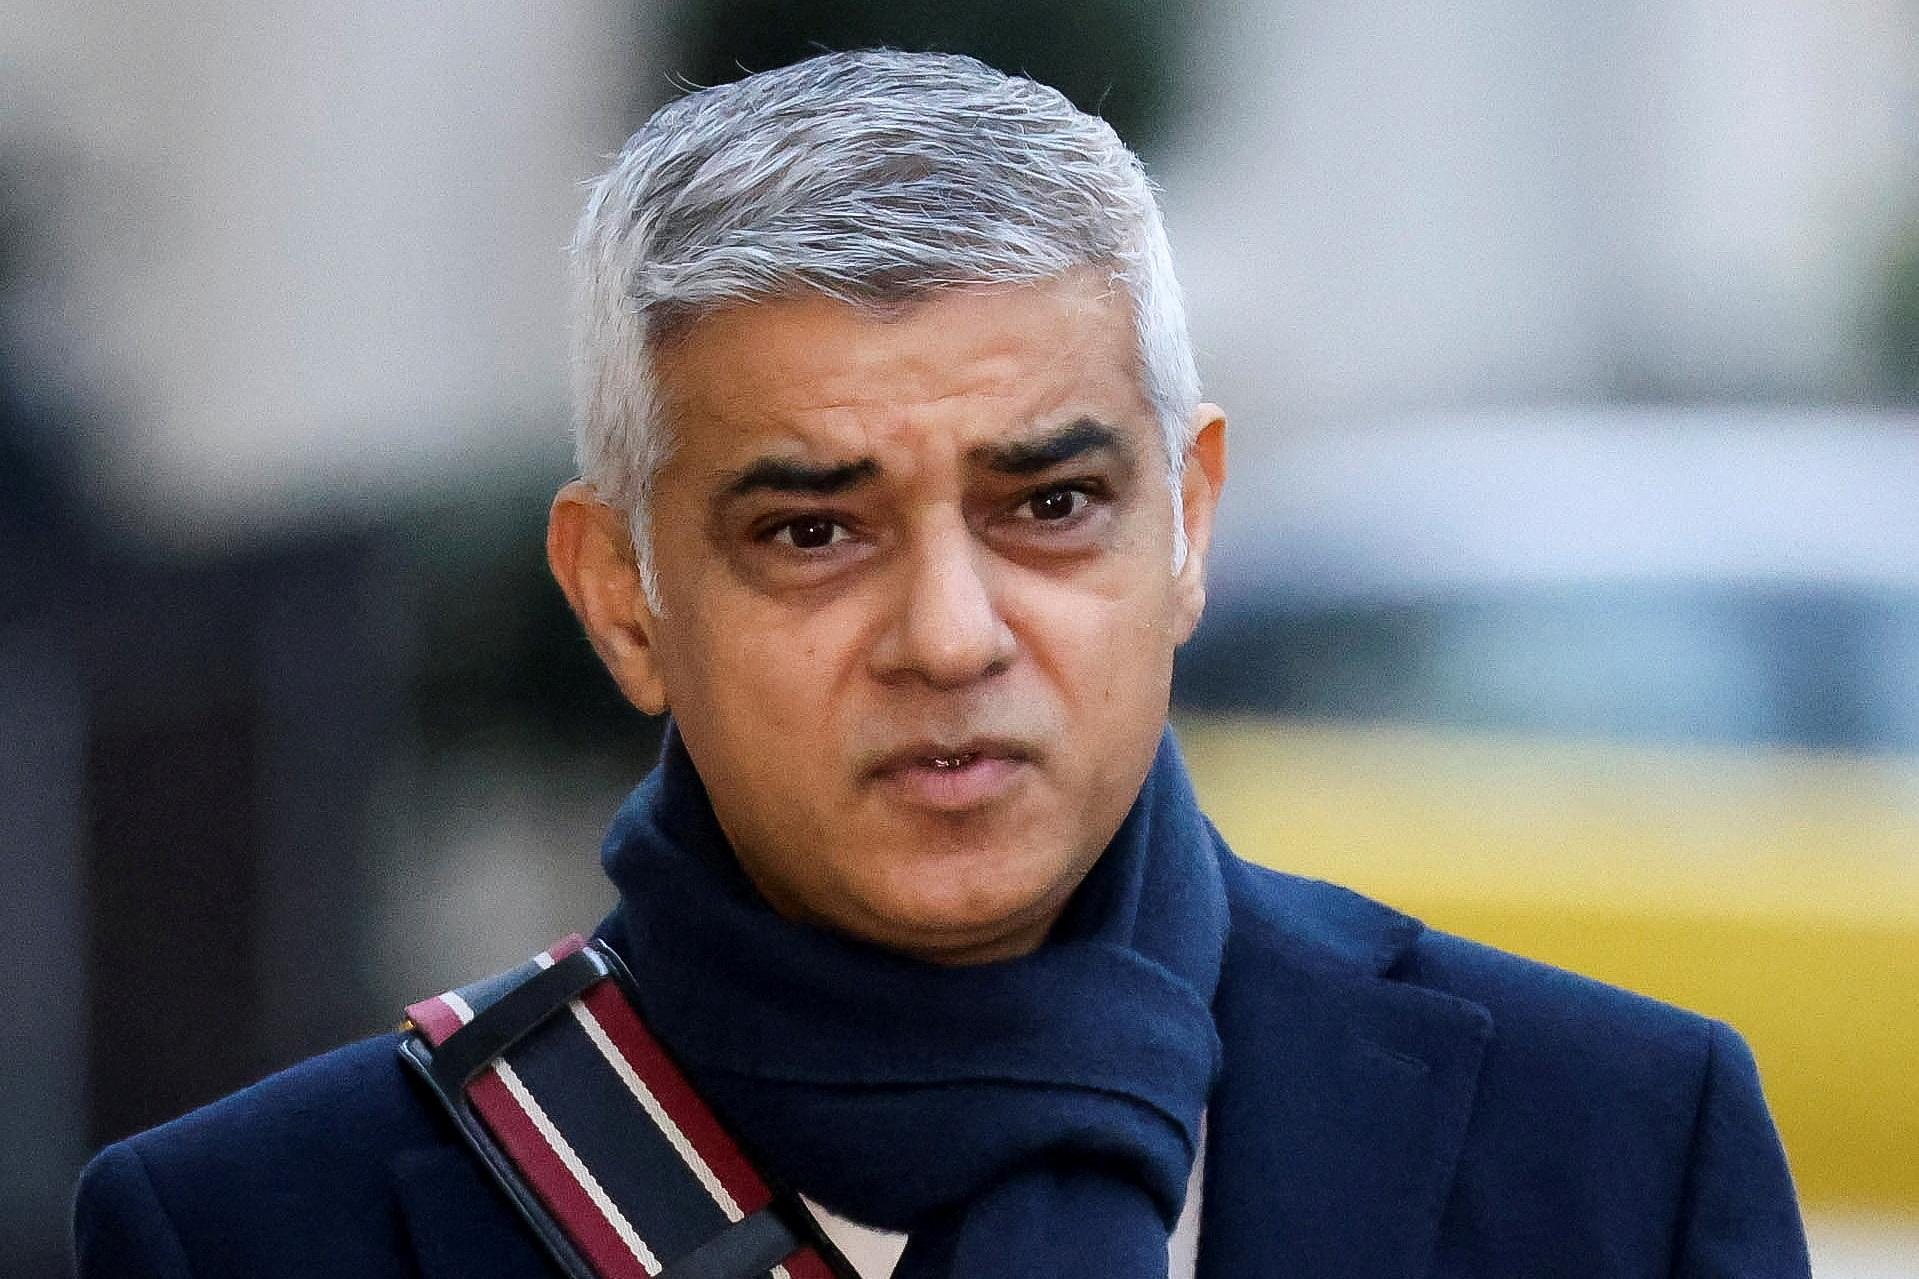 London Mayor Sadiq Khan denounces the cost of Brexit and calls for rapprochement with the EU